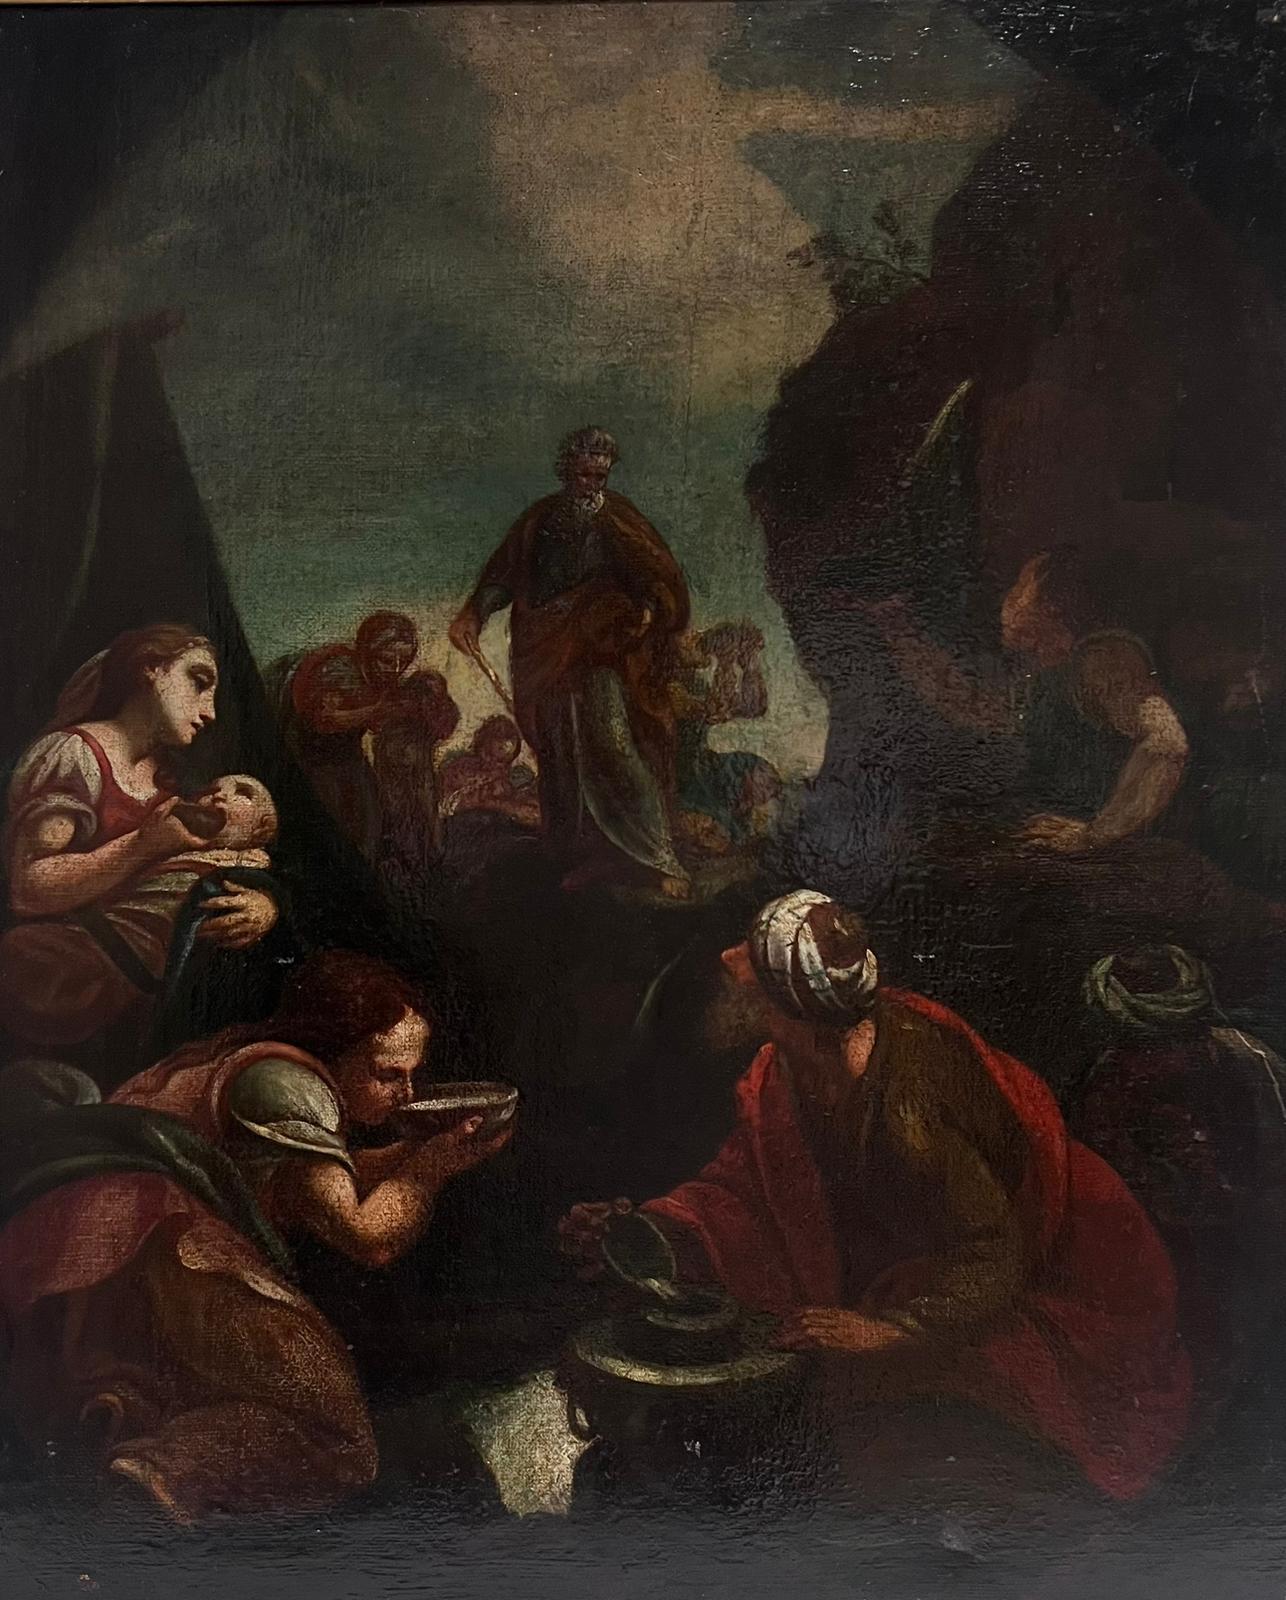 Moses Striking Water from the Rock; 
Circle of Pietro Dandini, Italian 1646-1712
Italian School, late 17th century
oil on canvas, framed
framed: 32 x 28 inches
canvas: 29 x 23.5 inches

Condition: good and sound condition 
Provenance: private